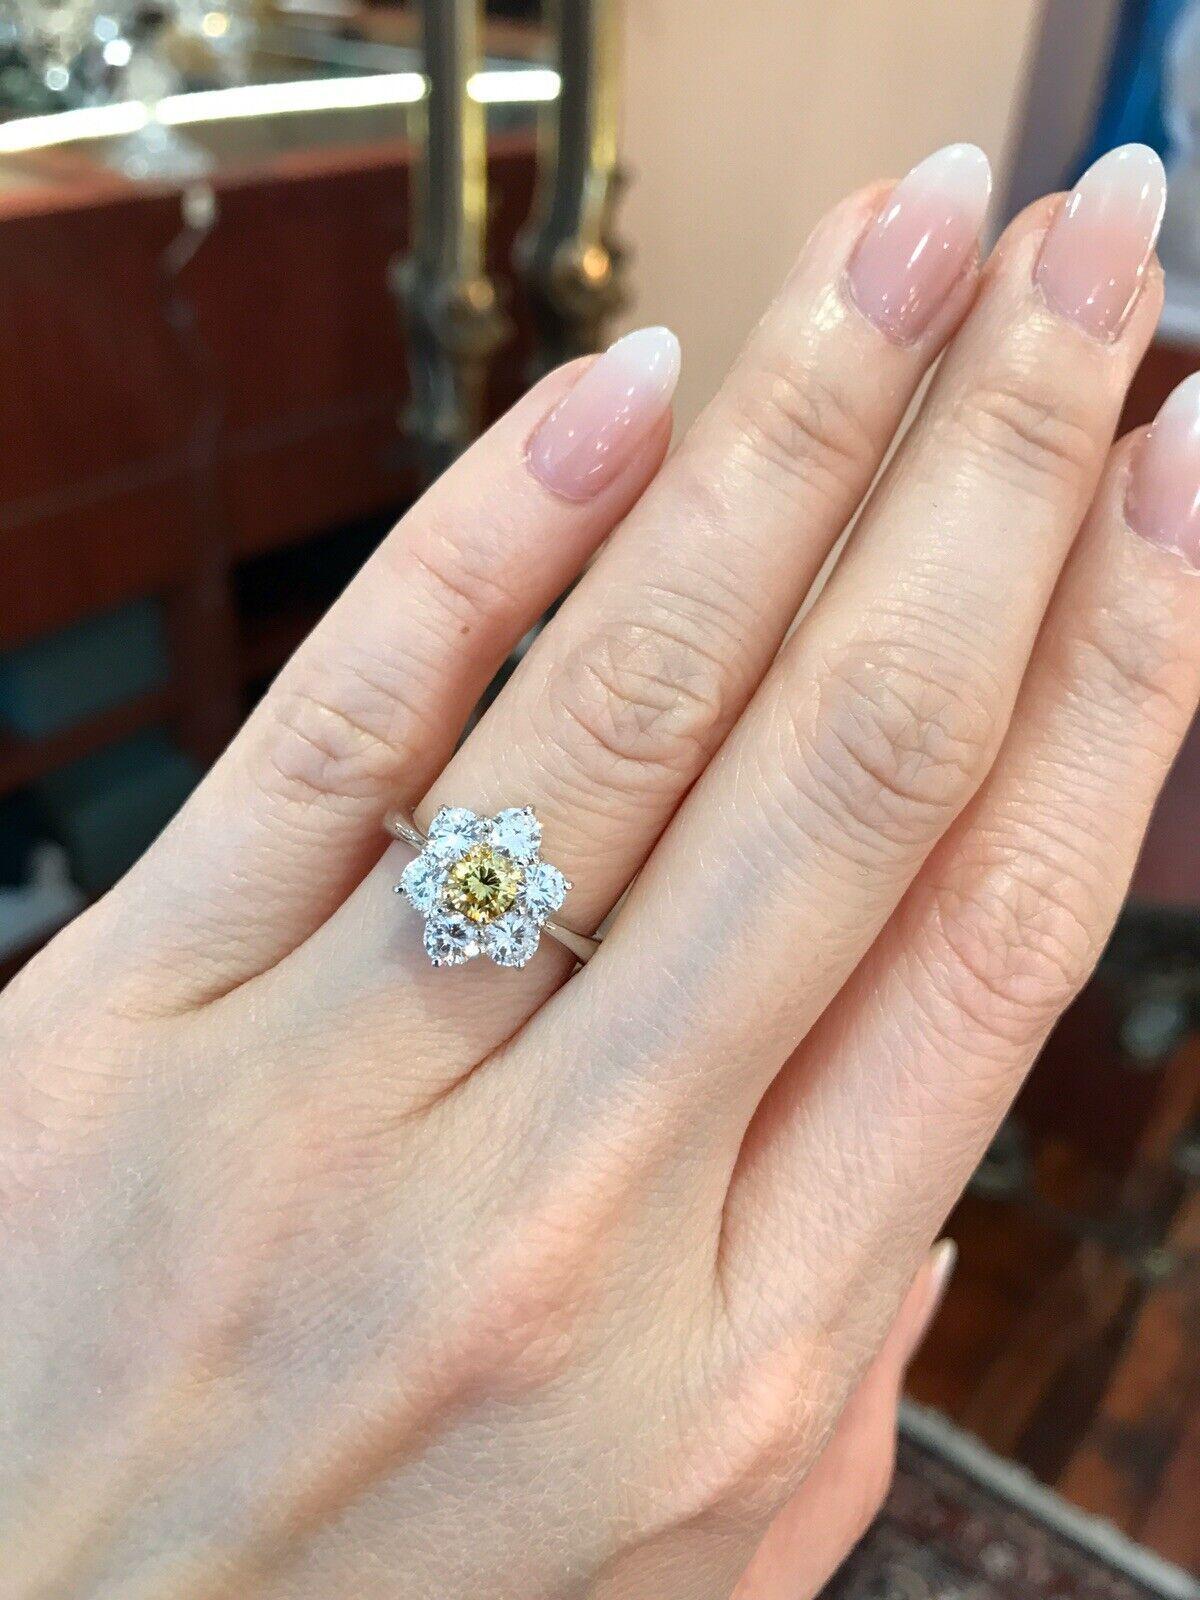 GIA Fancy Intense Yellow Diamond Floret Ring in Platinum and 18k Gold In Excellent Condition For Sale In La Jolla, CA